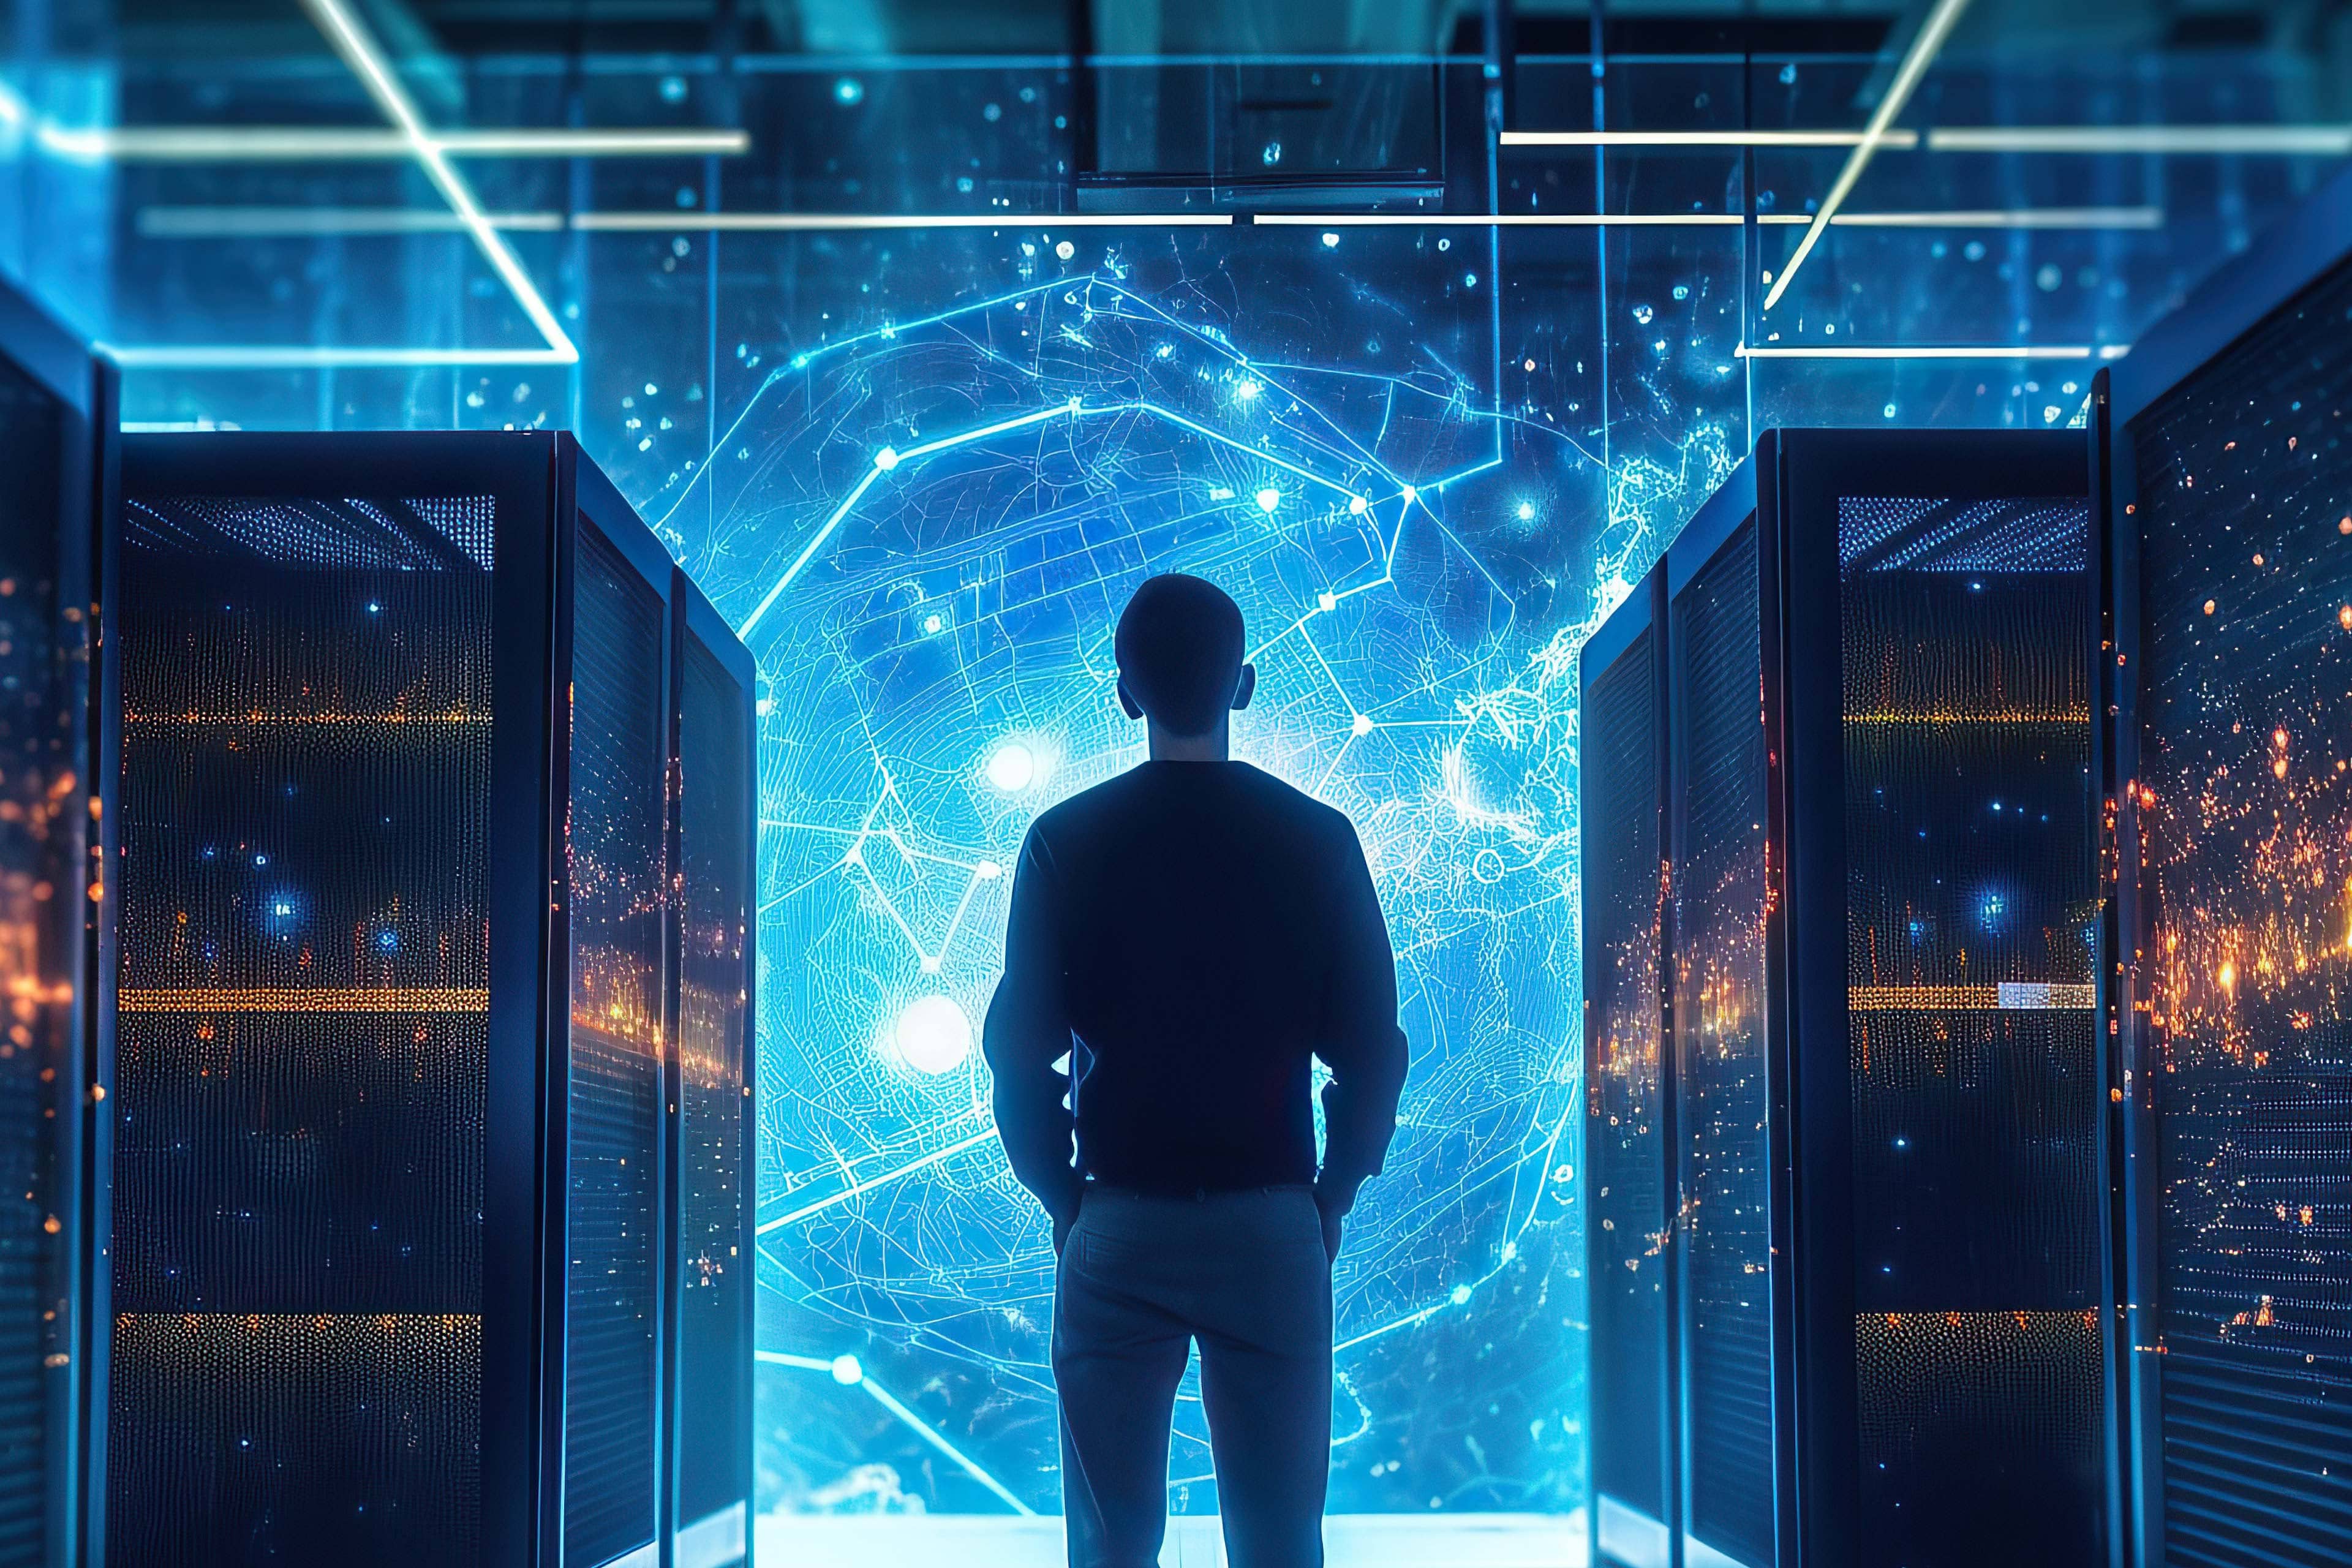 IT professional standing in a data center looking at a digital map of a network, representing the reliable and flexible cloud server solutions offered with expert management to ensure computing power for businesses